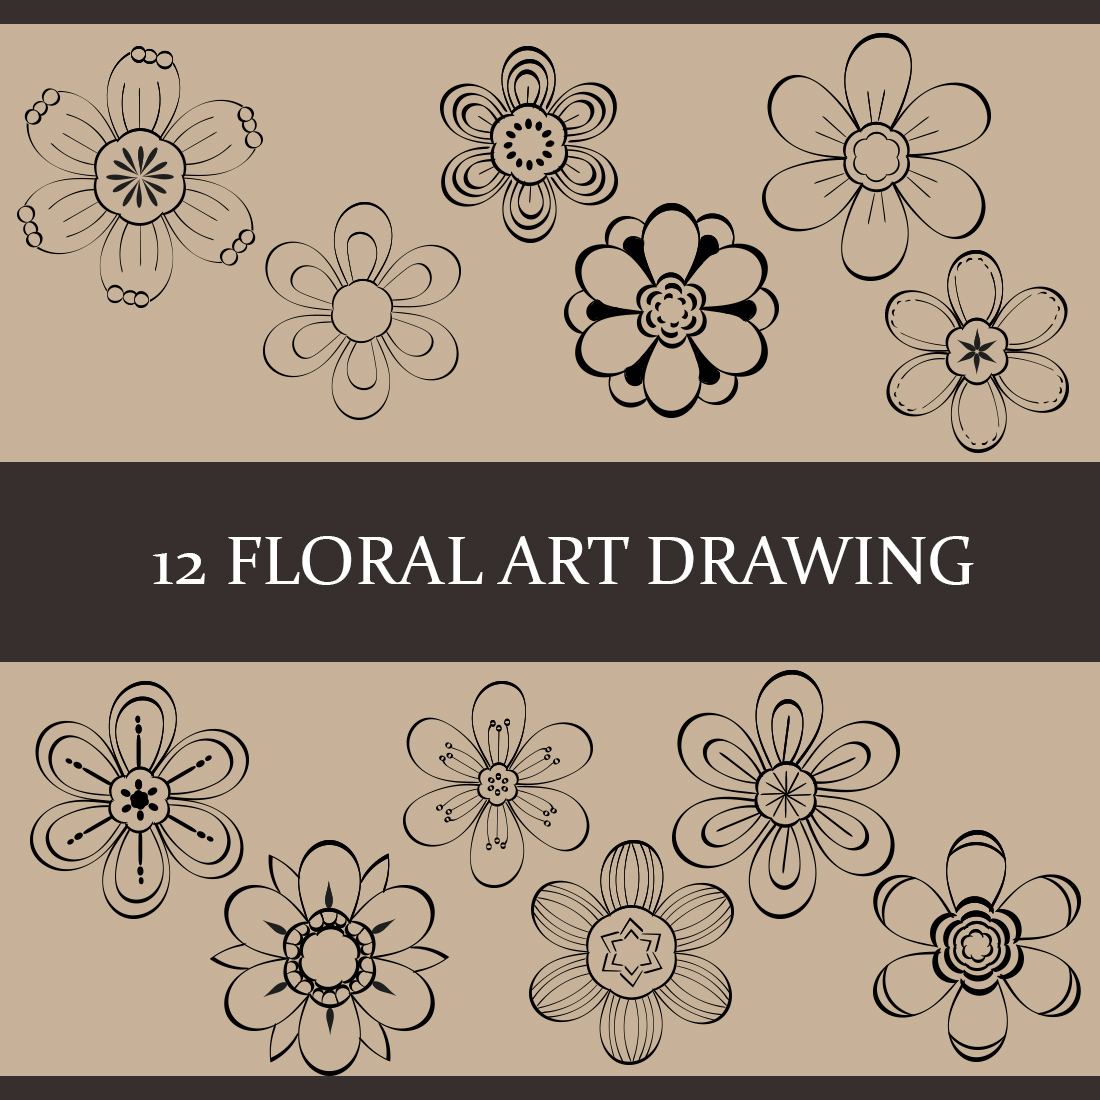 Floral Art Drawing With Line-Art cover image.